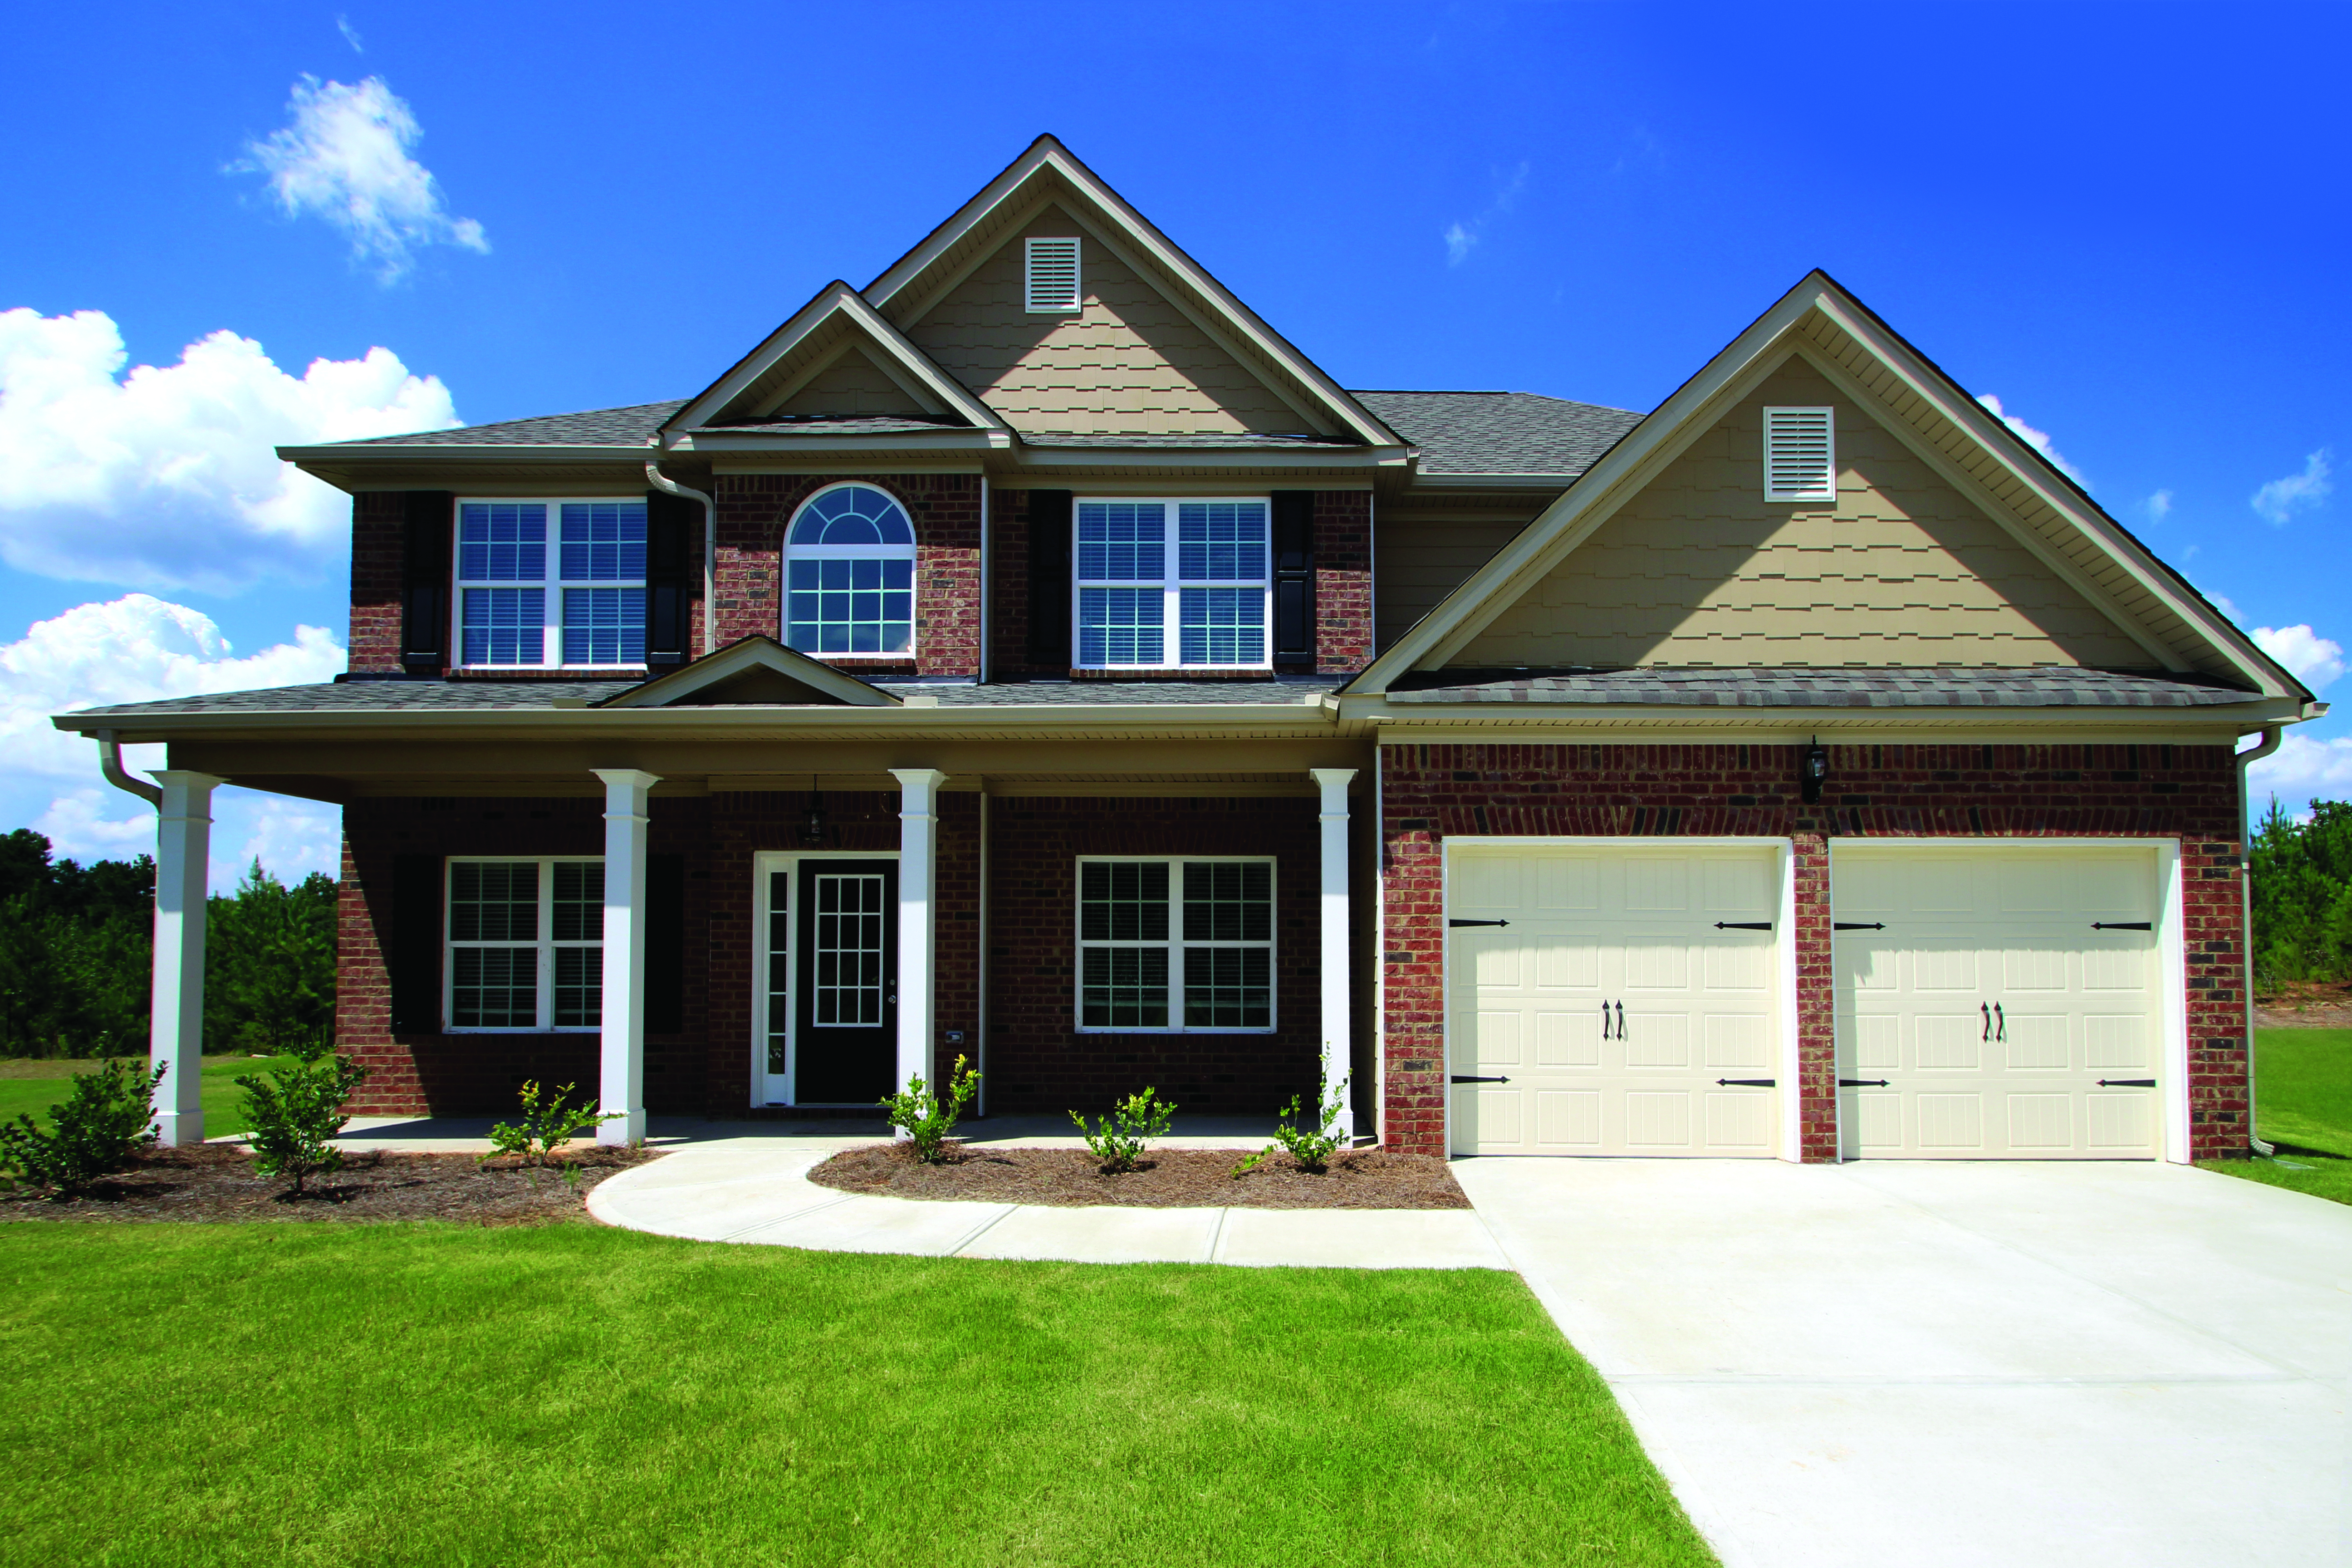 The exterior of a new construction home in Fairburn, GA.